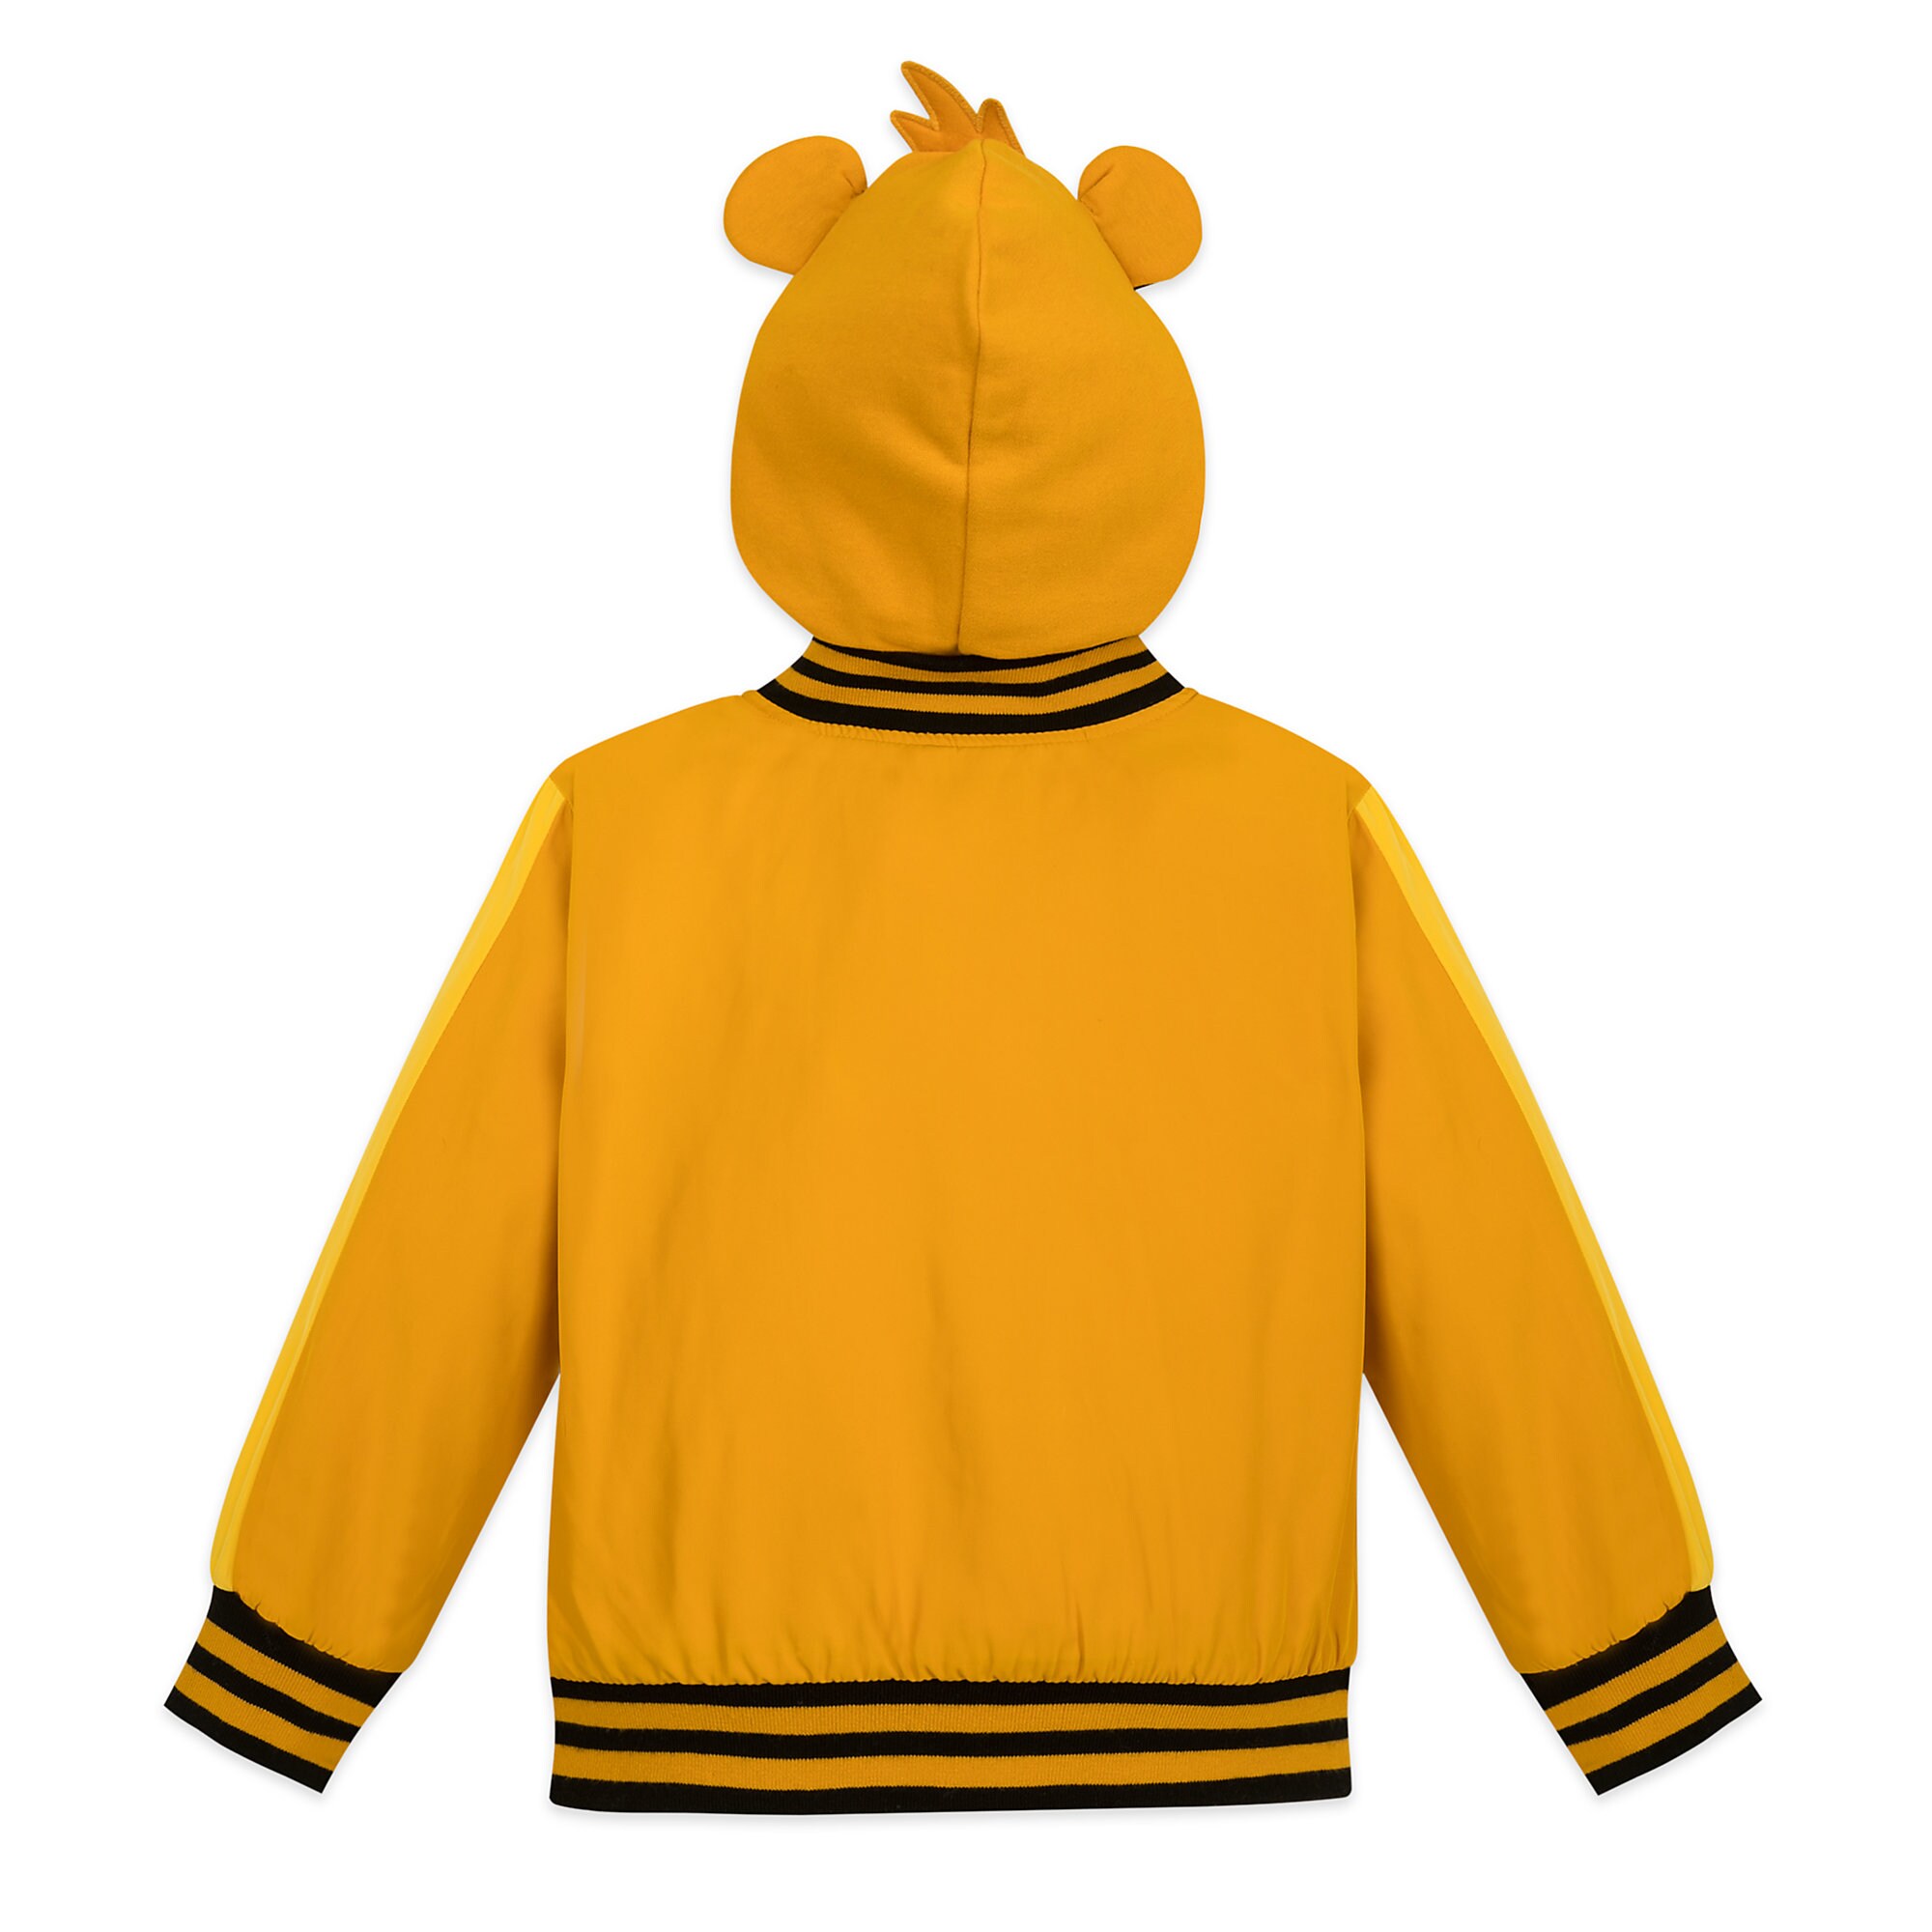 Simba Hooded Jacket for Boys - The Lion King